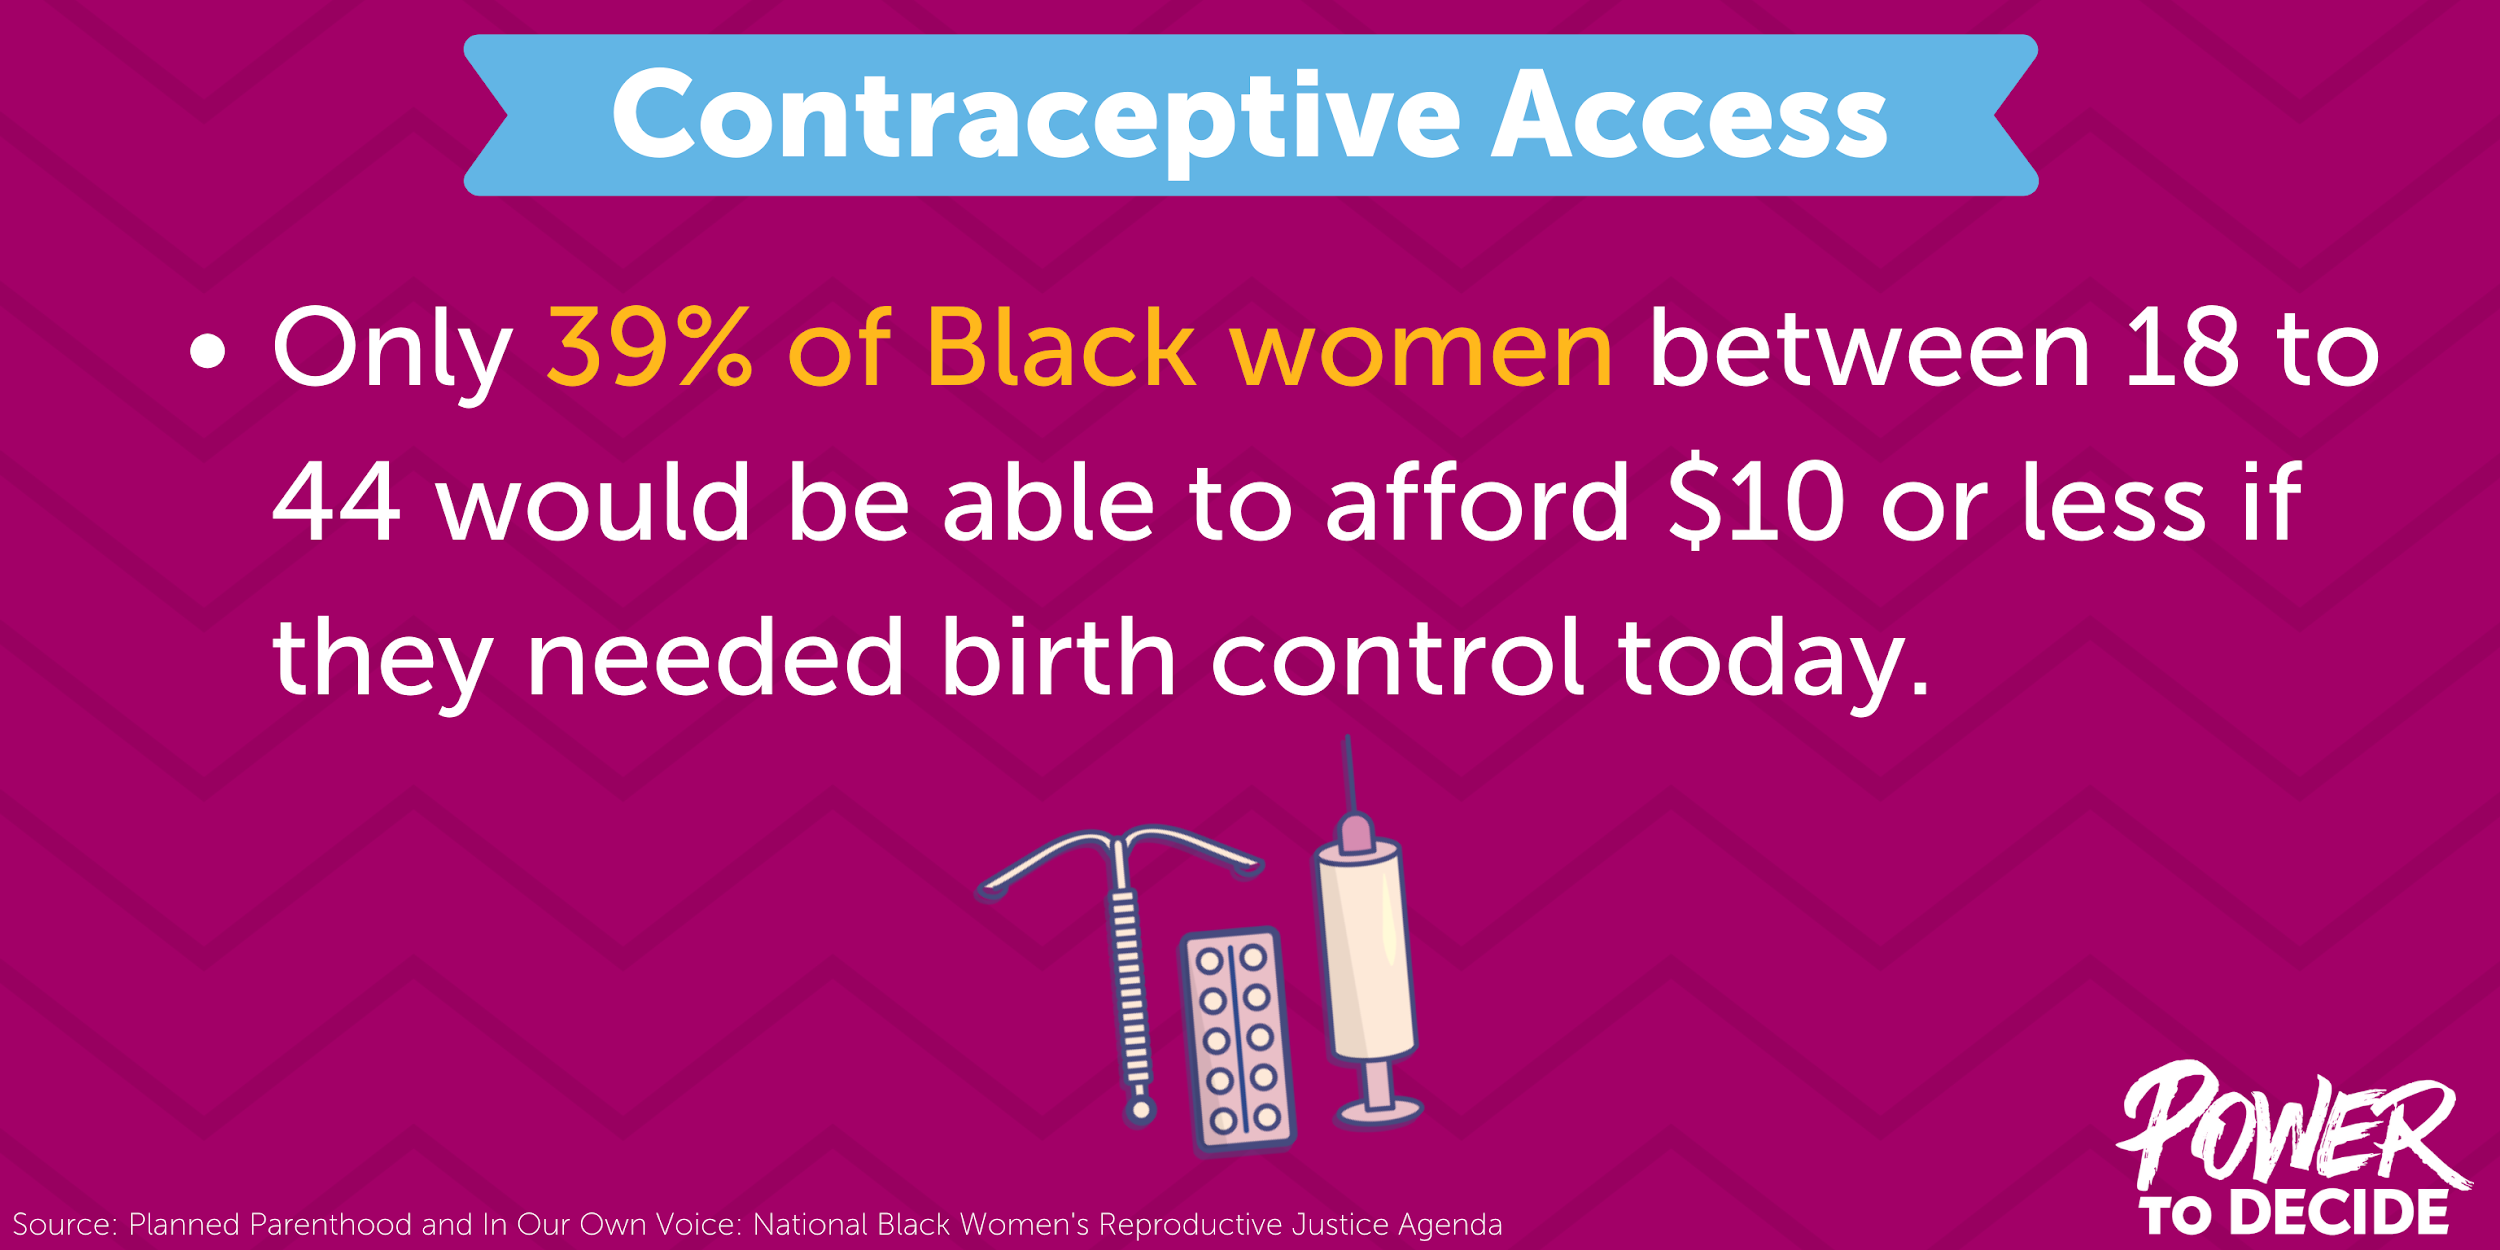 An illustration of some methods of birth control and the words, "Only 39% of Black women between 18 to 44 would be able to afford $10 or less if they needed birth control today."